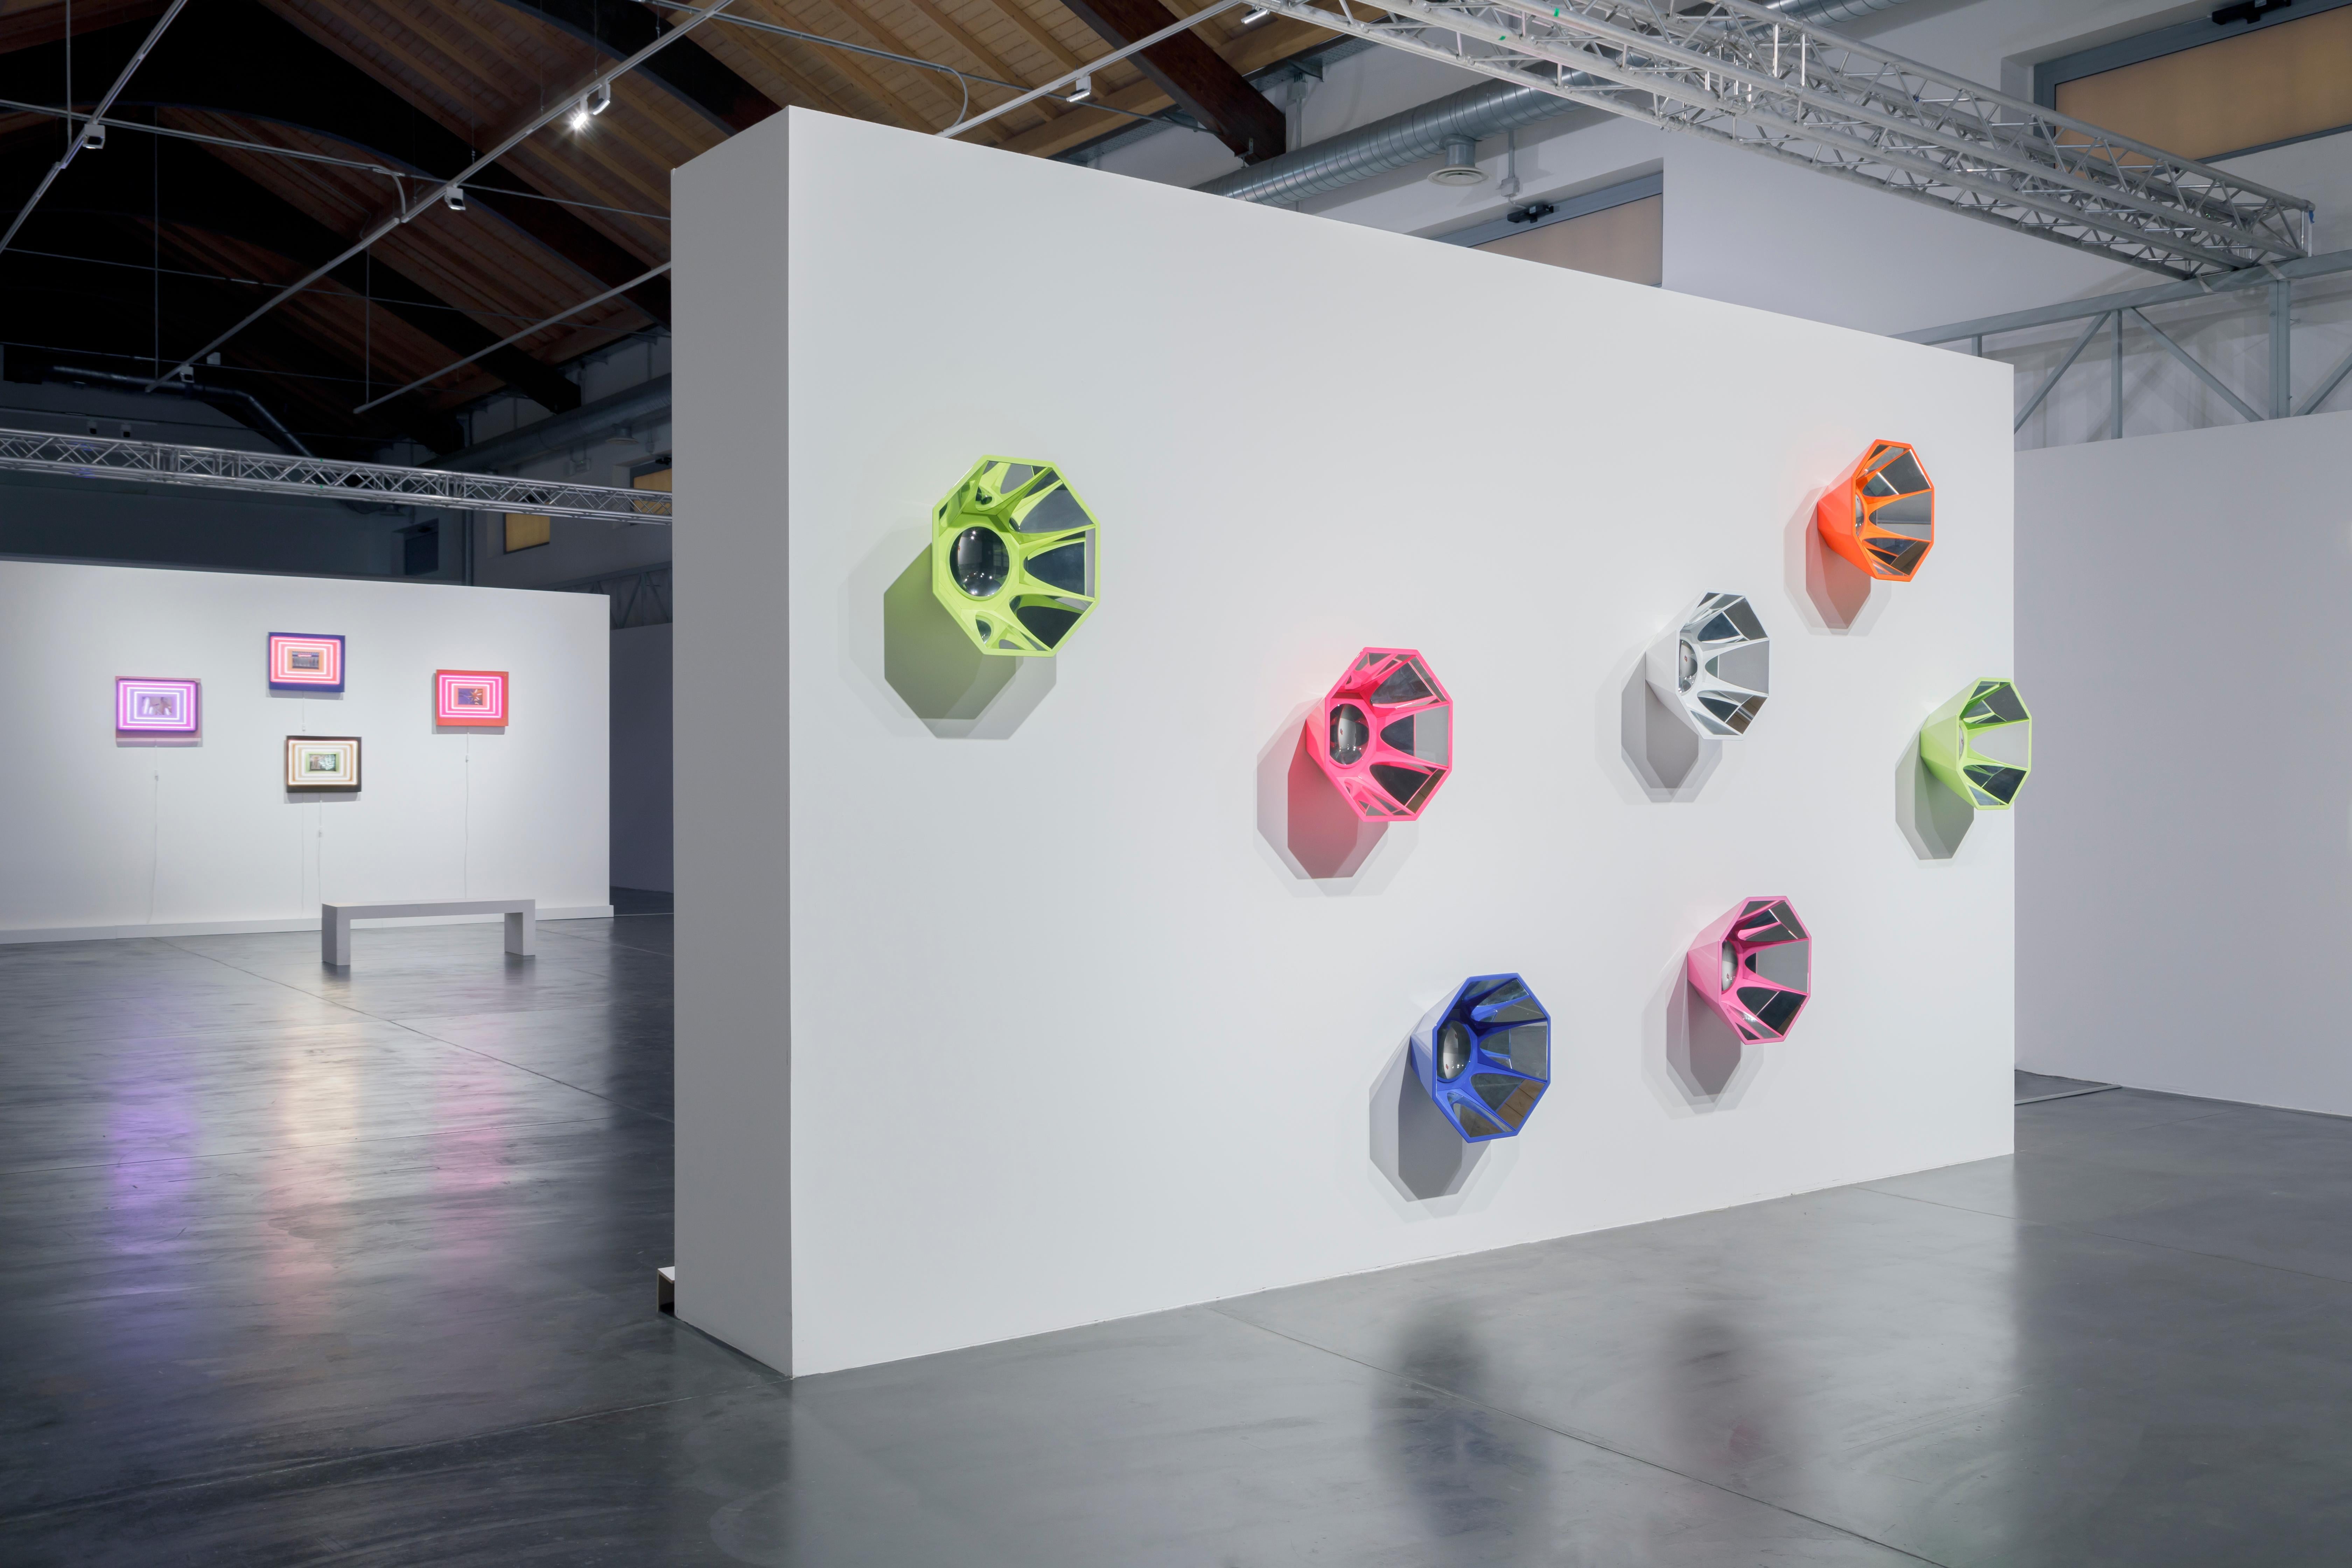 Chiara Dynys returns to deceive the viewer through optical devices capable of fragmenting, altering and disorienting the perception of vision. Kaleidos (2020) is a series of sculptures of different colors, kaleidoscopic in shape and composed of